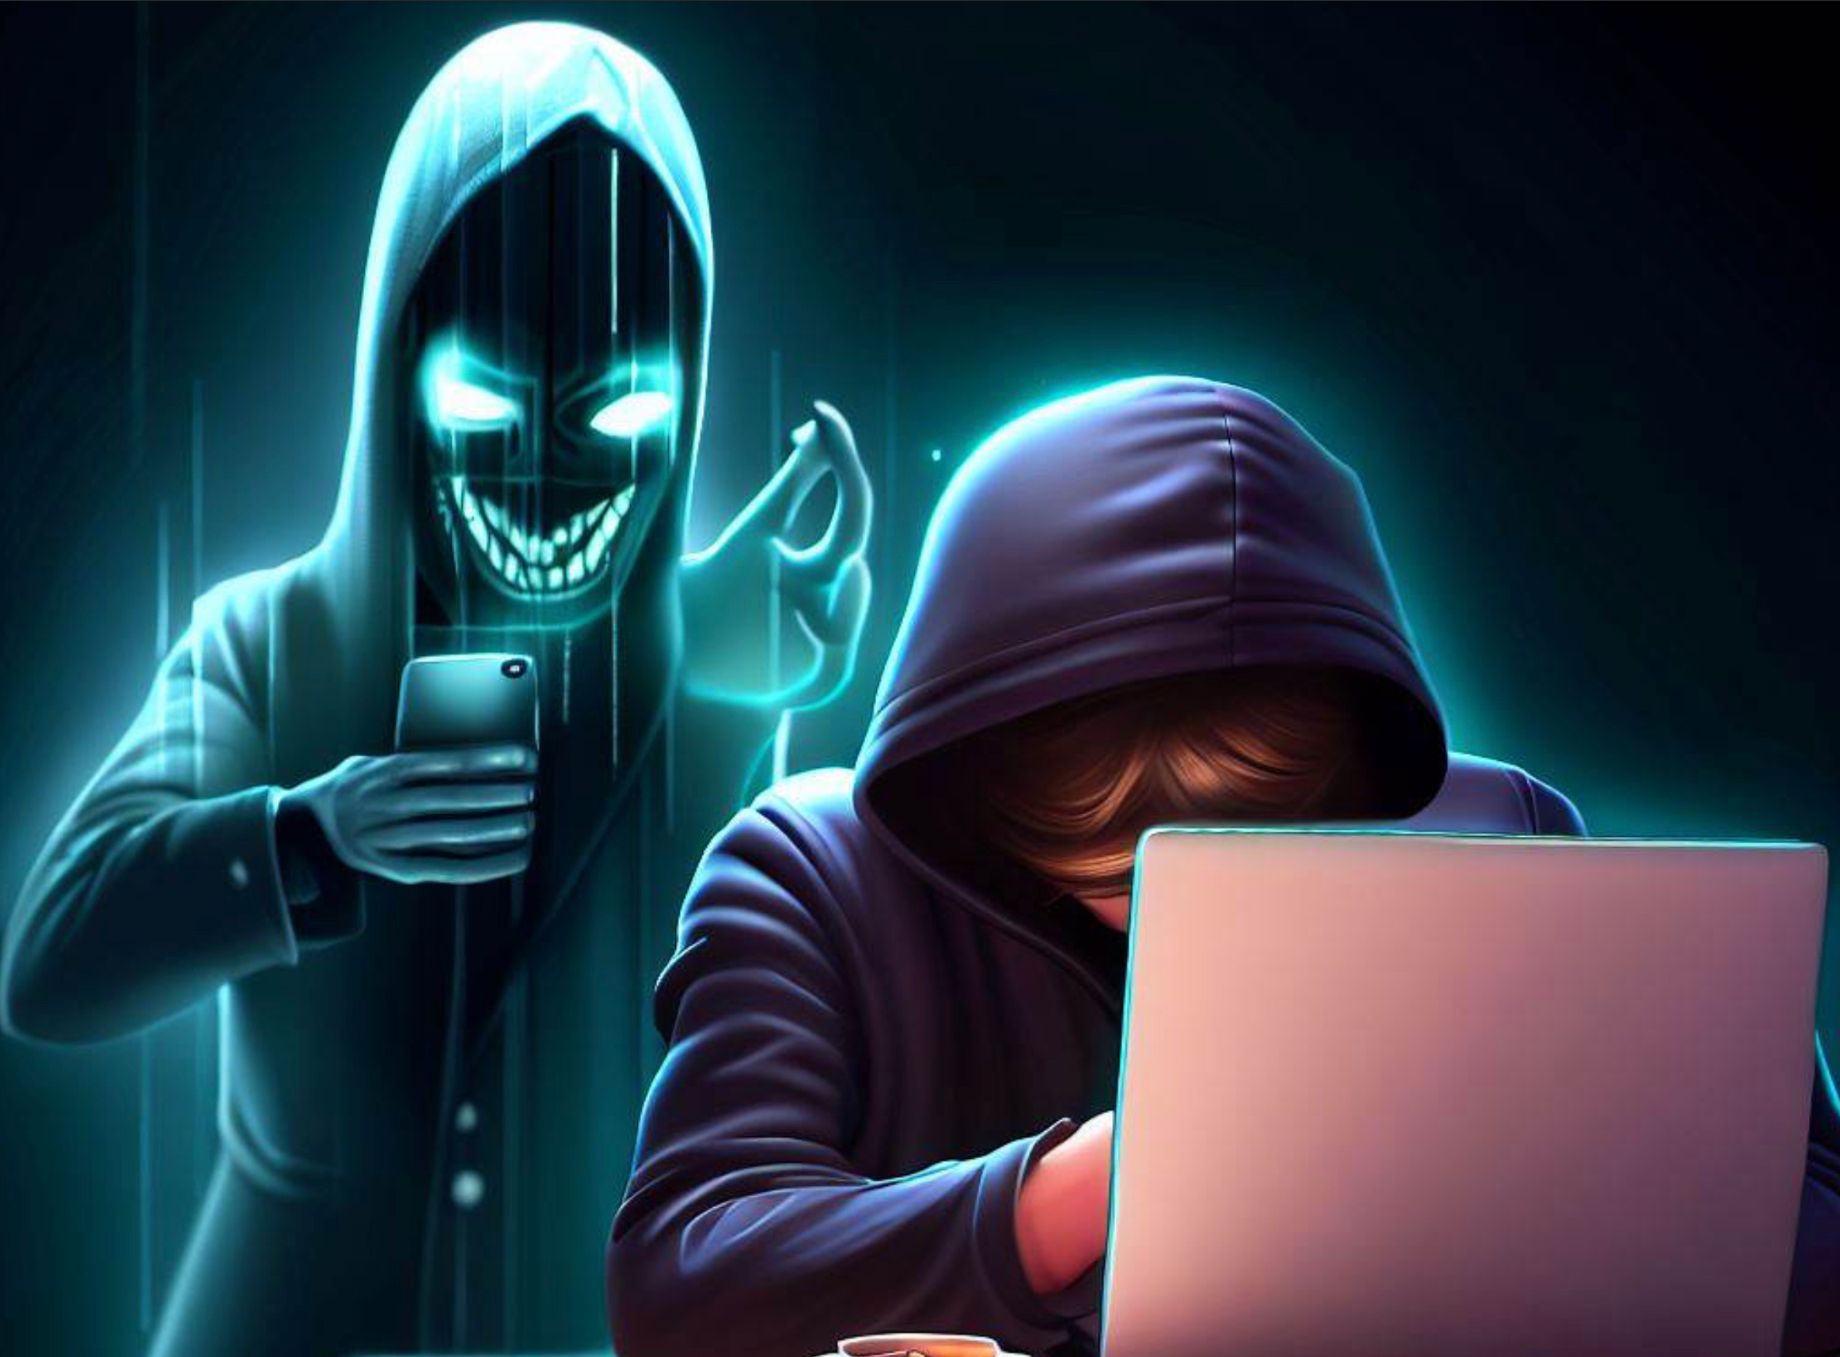 A cybercriminal apparition waiting to attack a computer user.